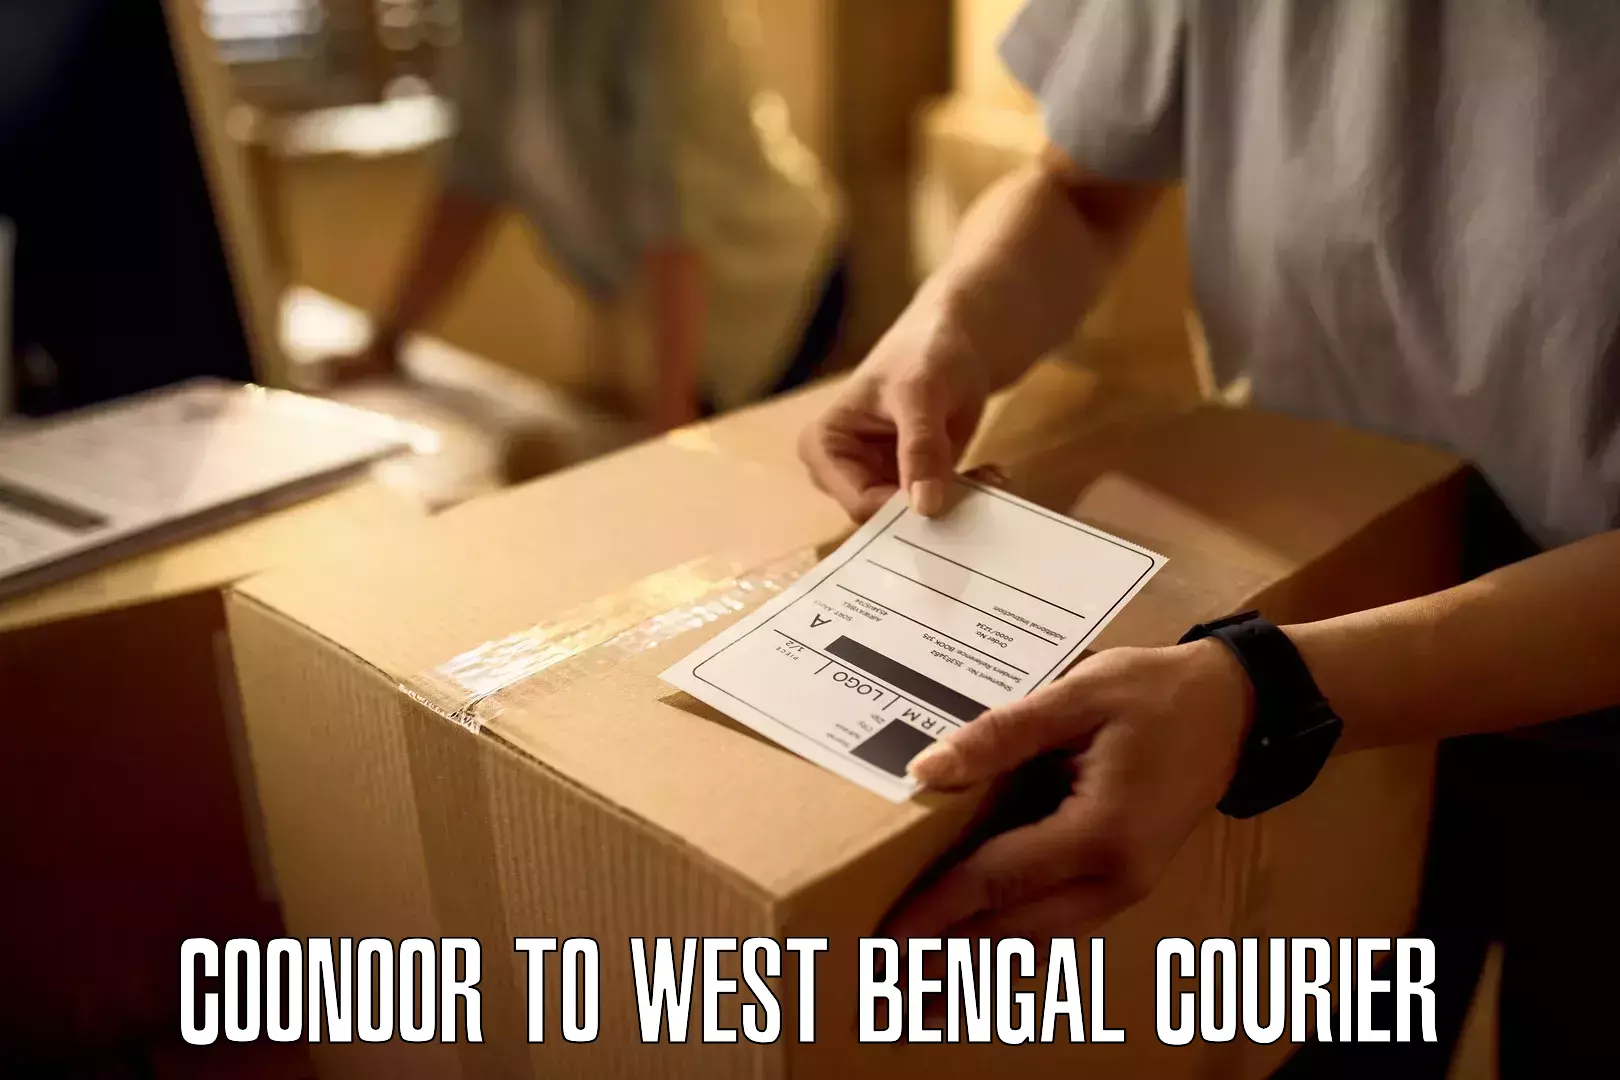 Nationwide shipping coverage Coonoor to West Bengal